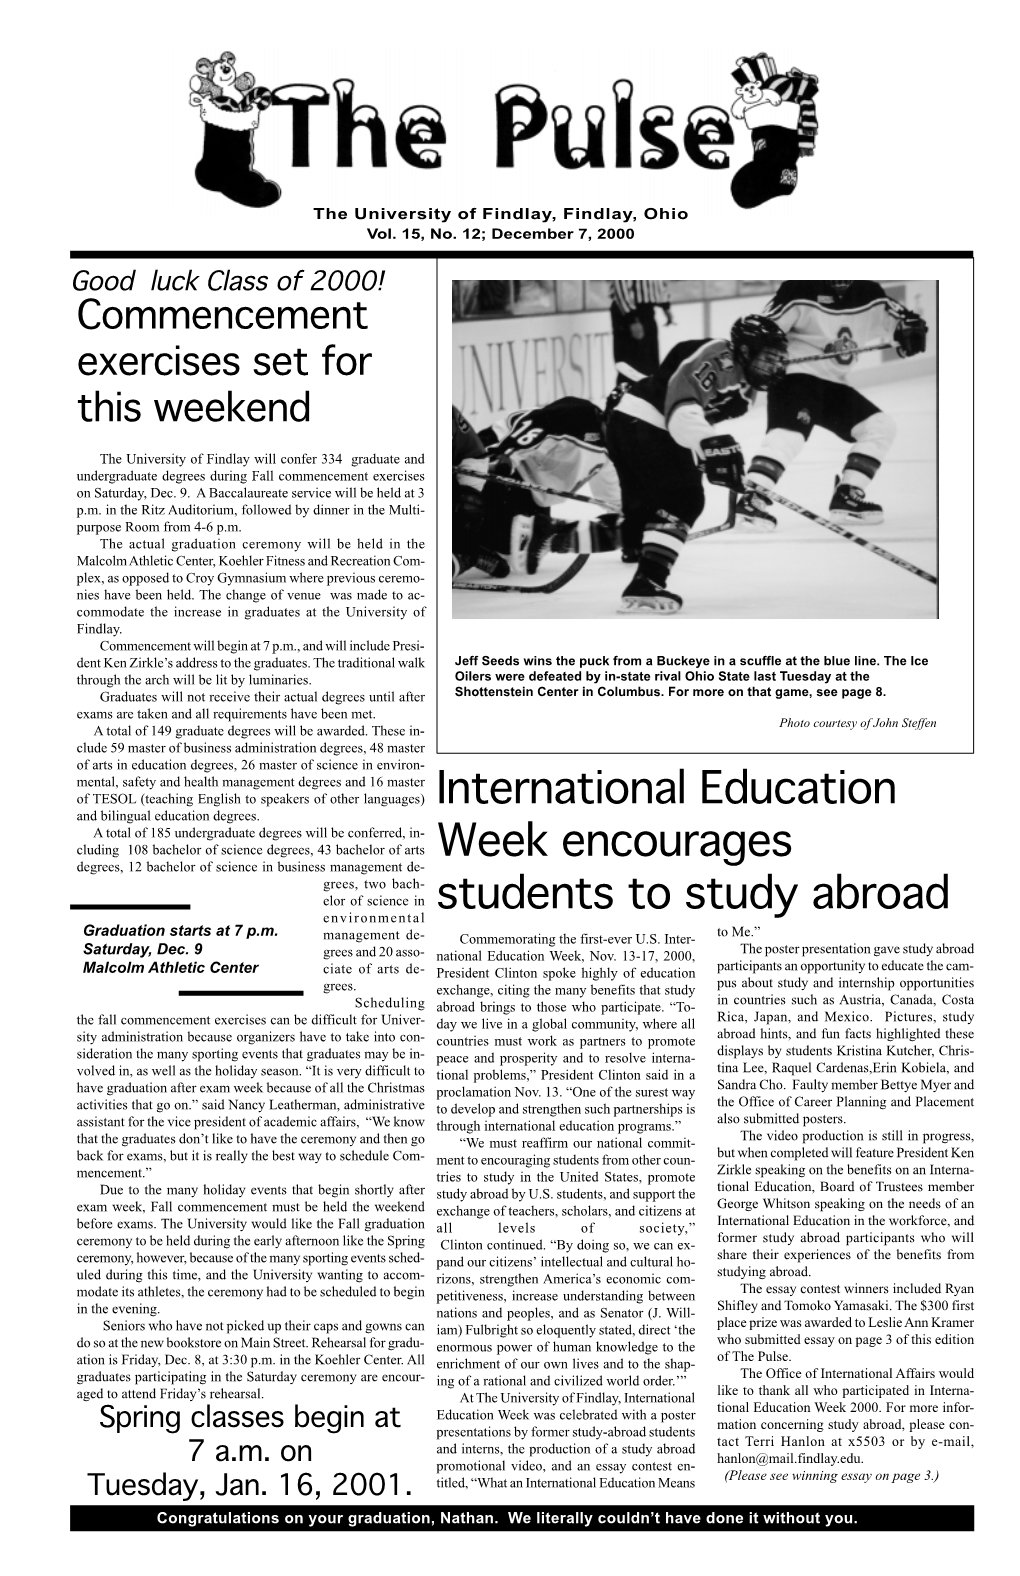 International Education Week Encourages Students to Study Abroad